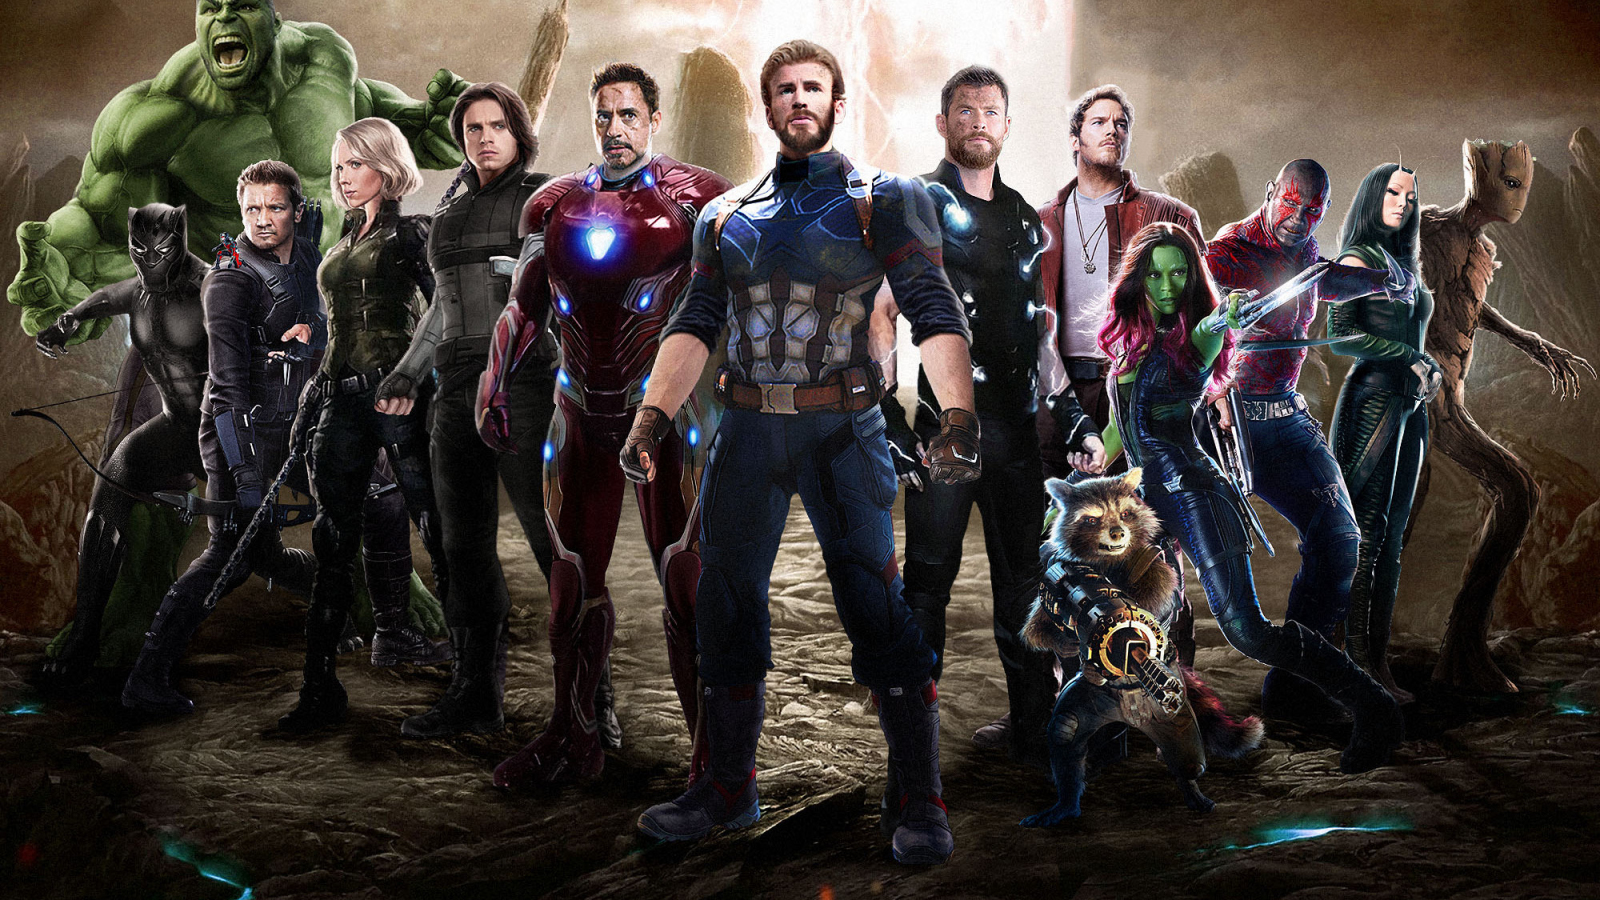 Desktop Wallpaper Team Of Superheroes, Movie, Avengers: Infinity War, HD Image, Picture, Background, 662a78